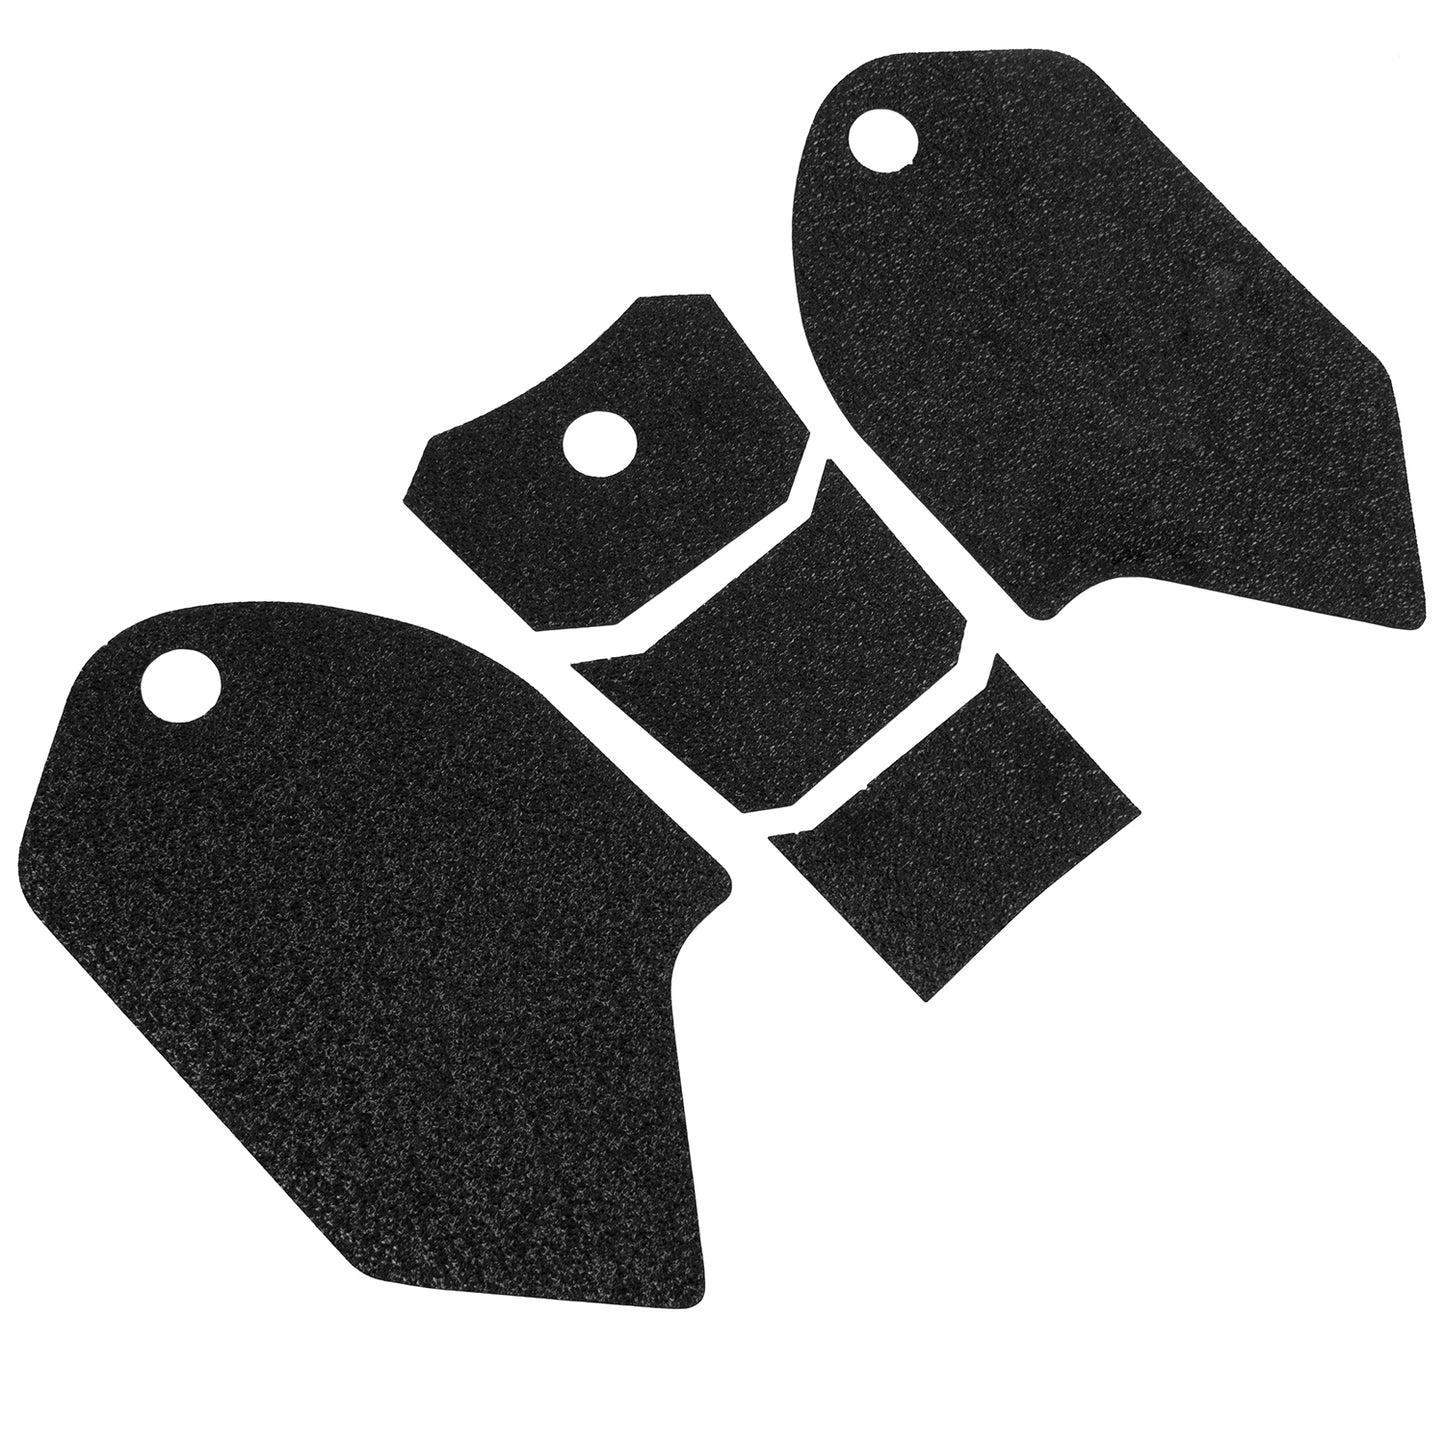 Wolfline Motorcycle Anti Slip Tank Pad Stickers Side Gas Tank Pad Knee Grip Decals Protection For Honda CB650F CB 650F CB 650 F 2014 2015 2016 2017 2018